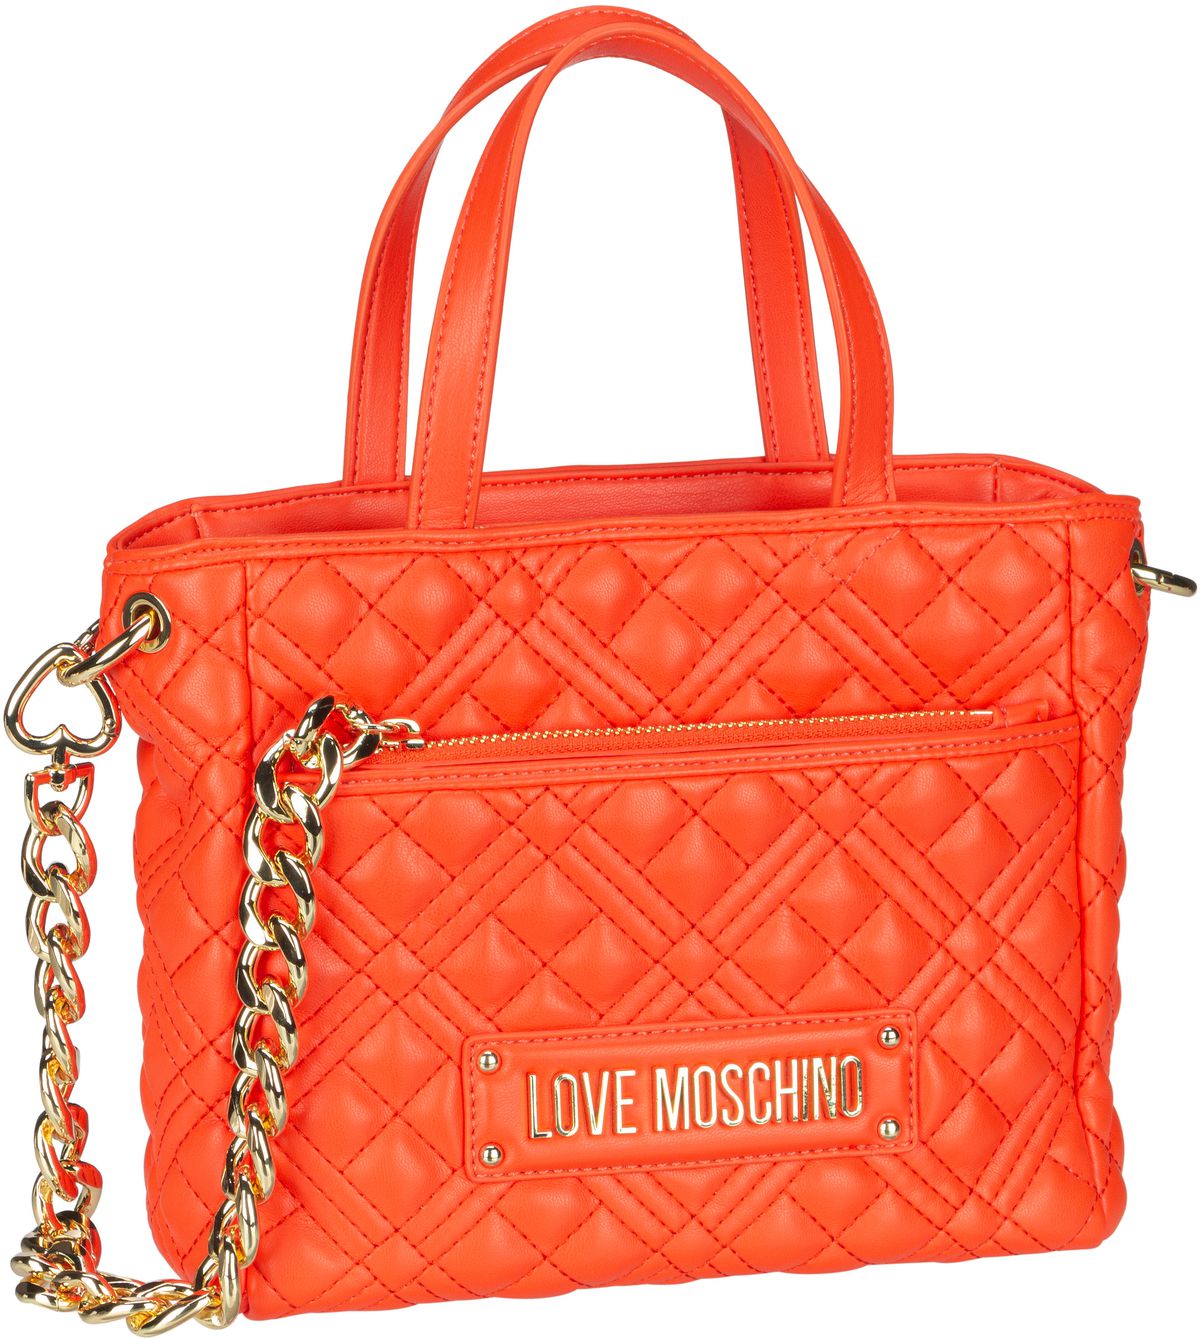 Love Moschino Quilted Bag Pocket 4020 - Orange